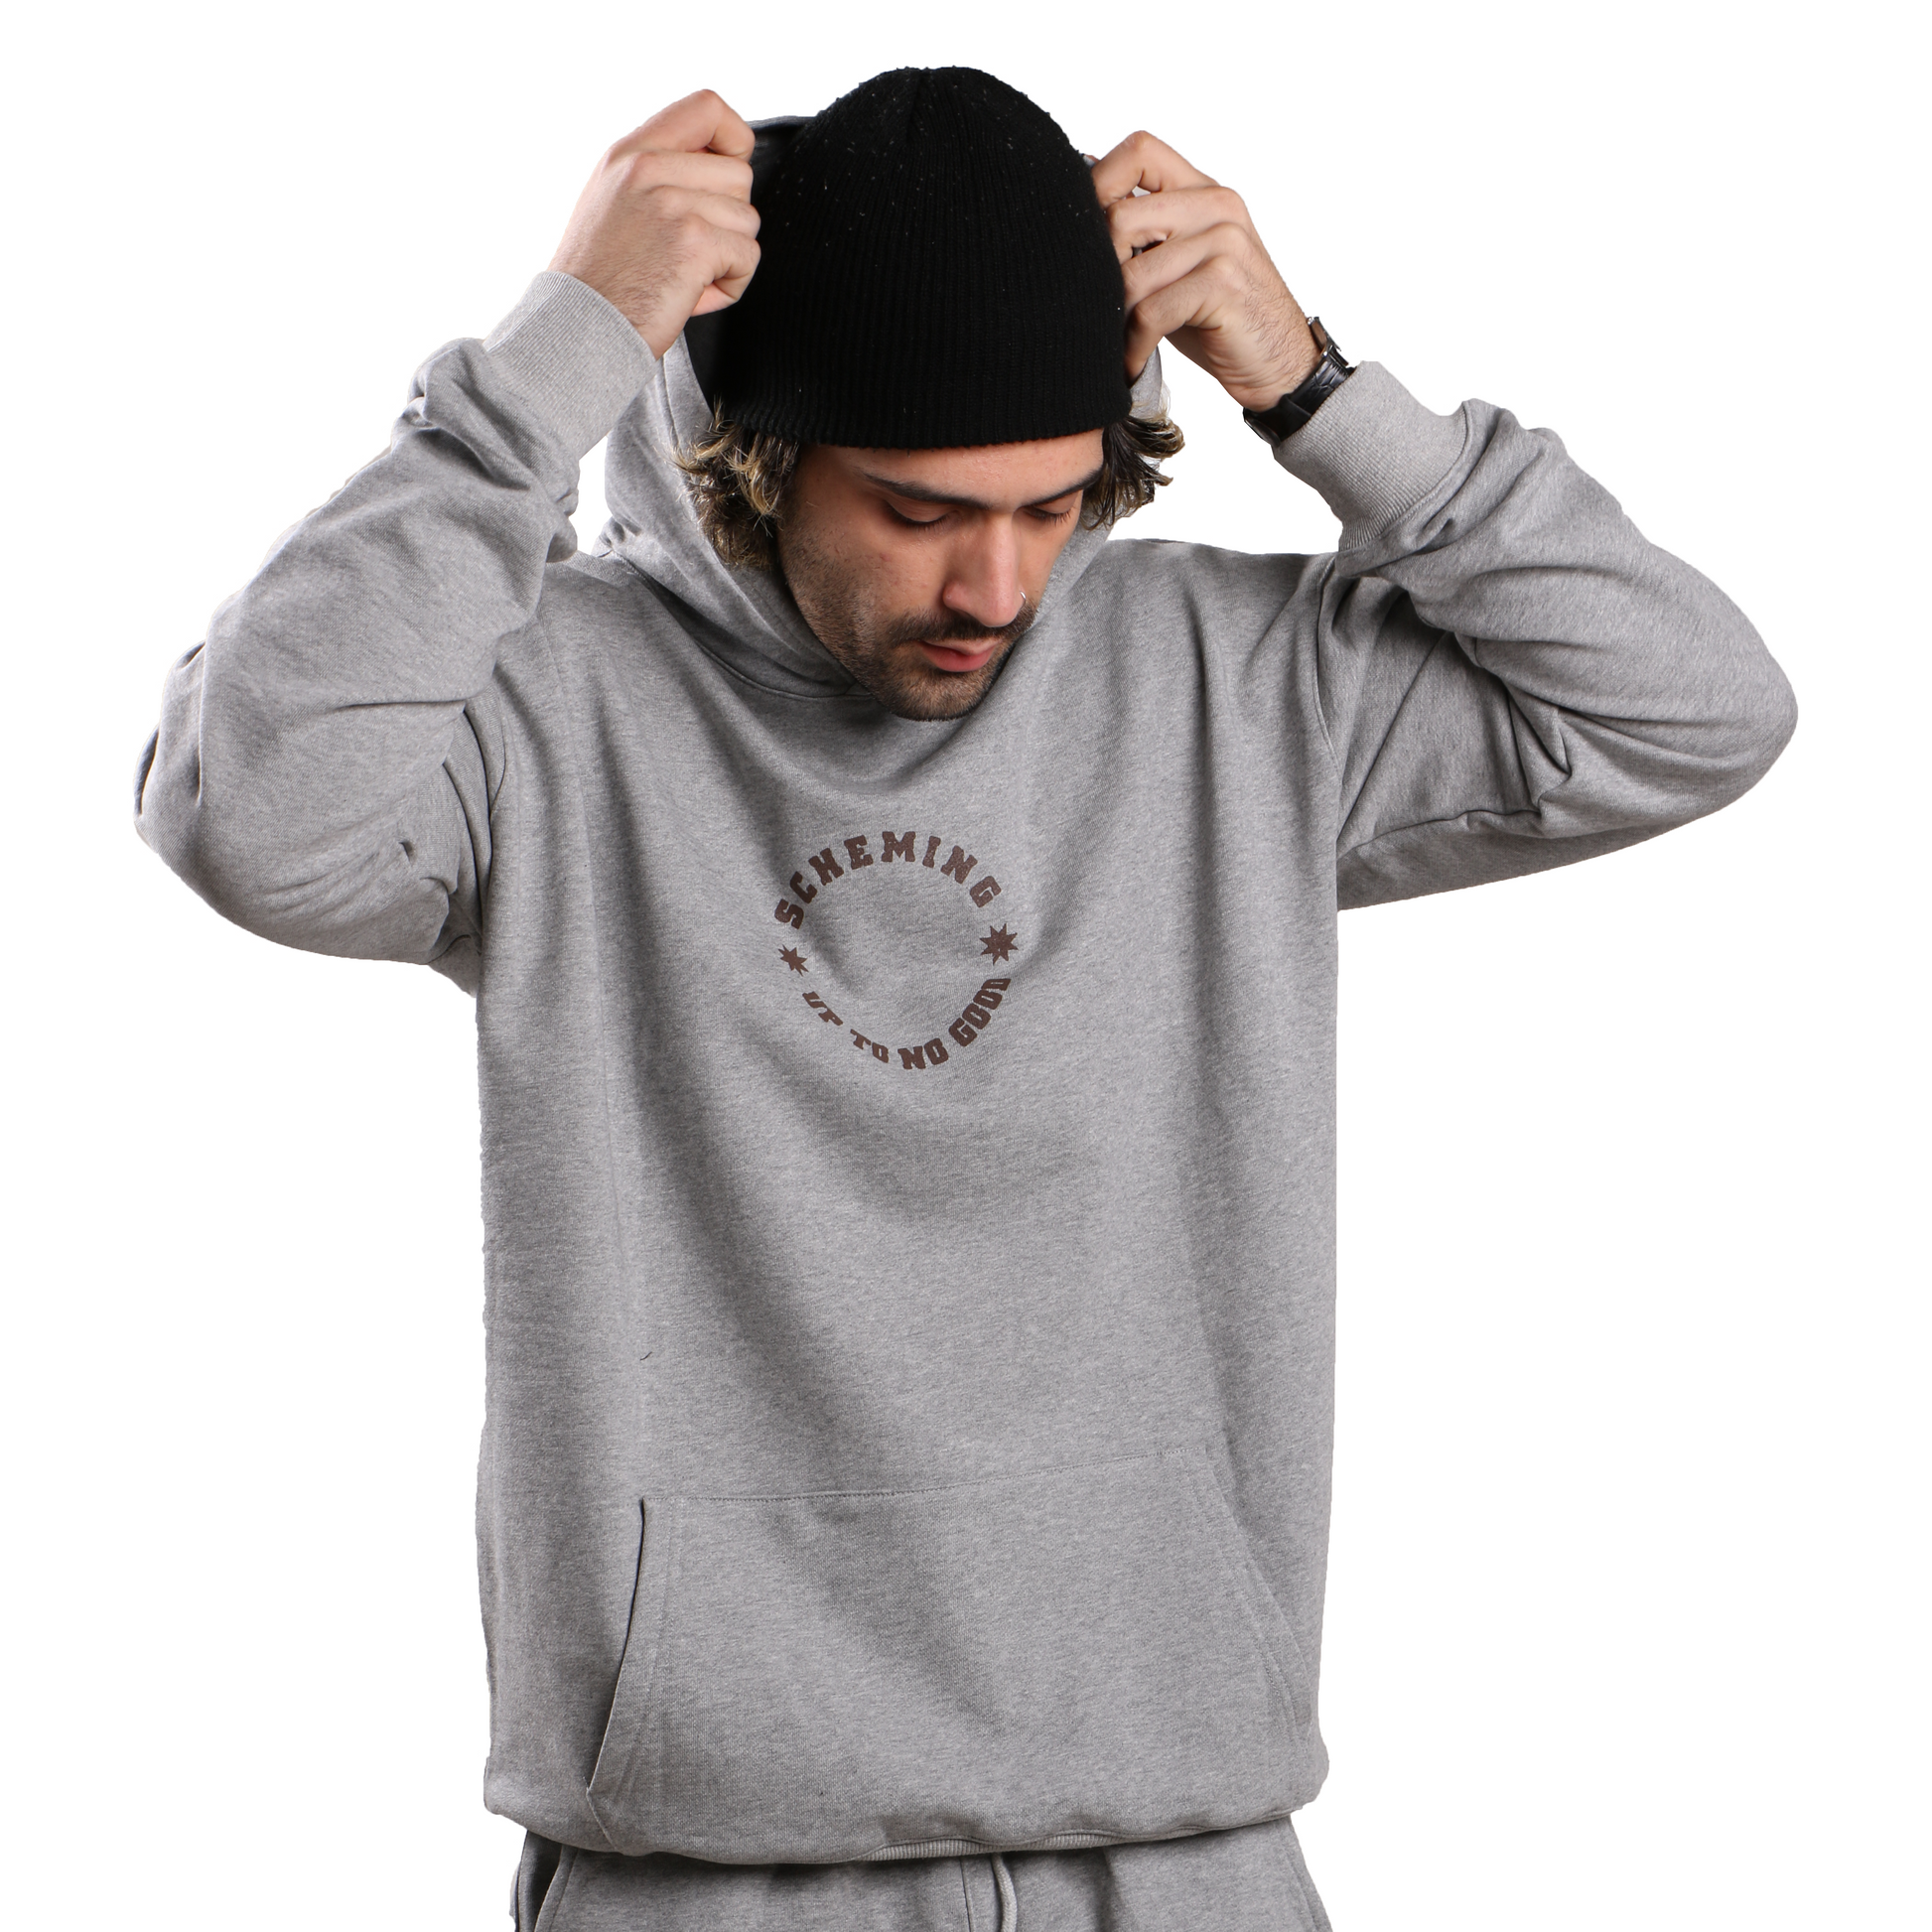 Up To No Good Hoodie - Scheming Co.